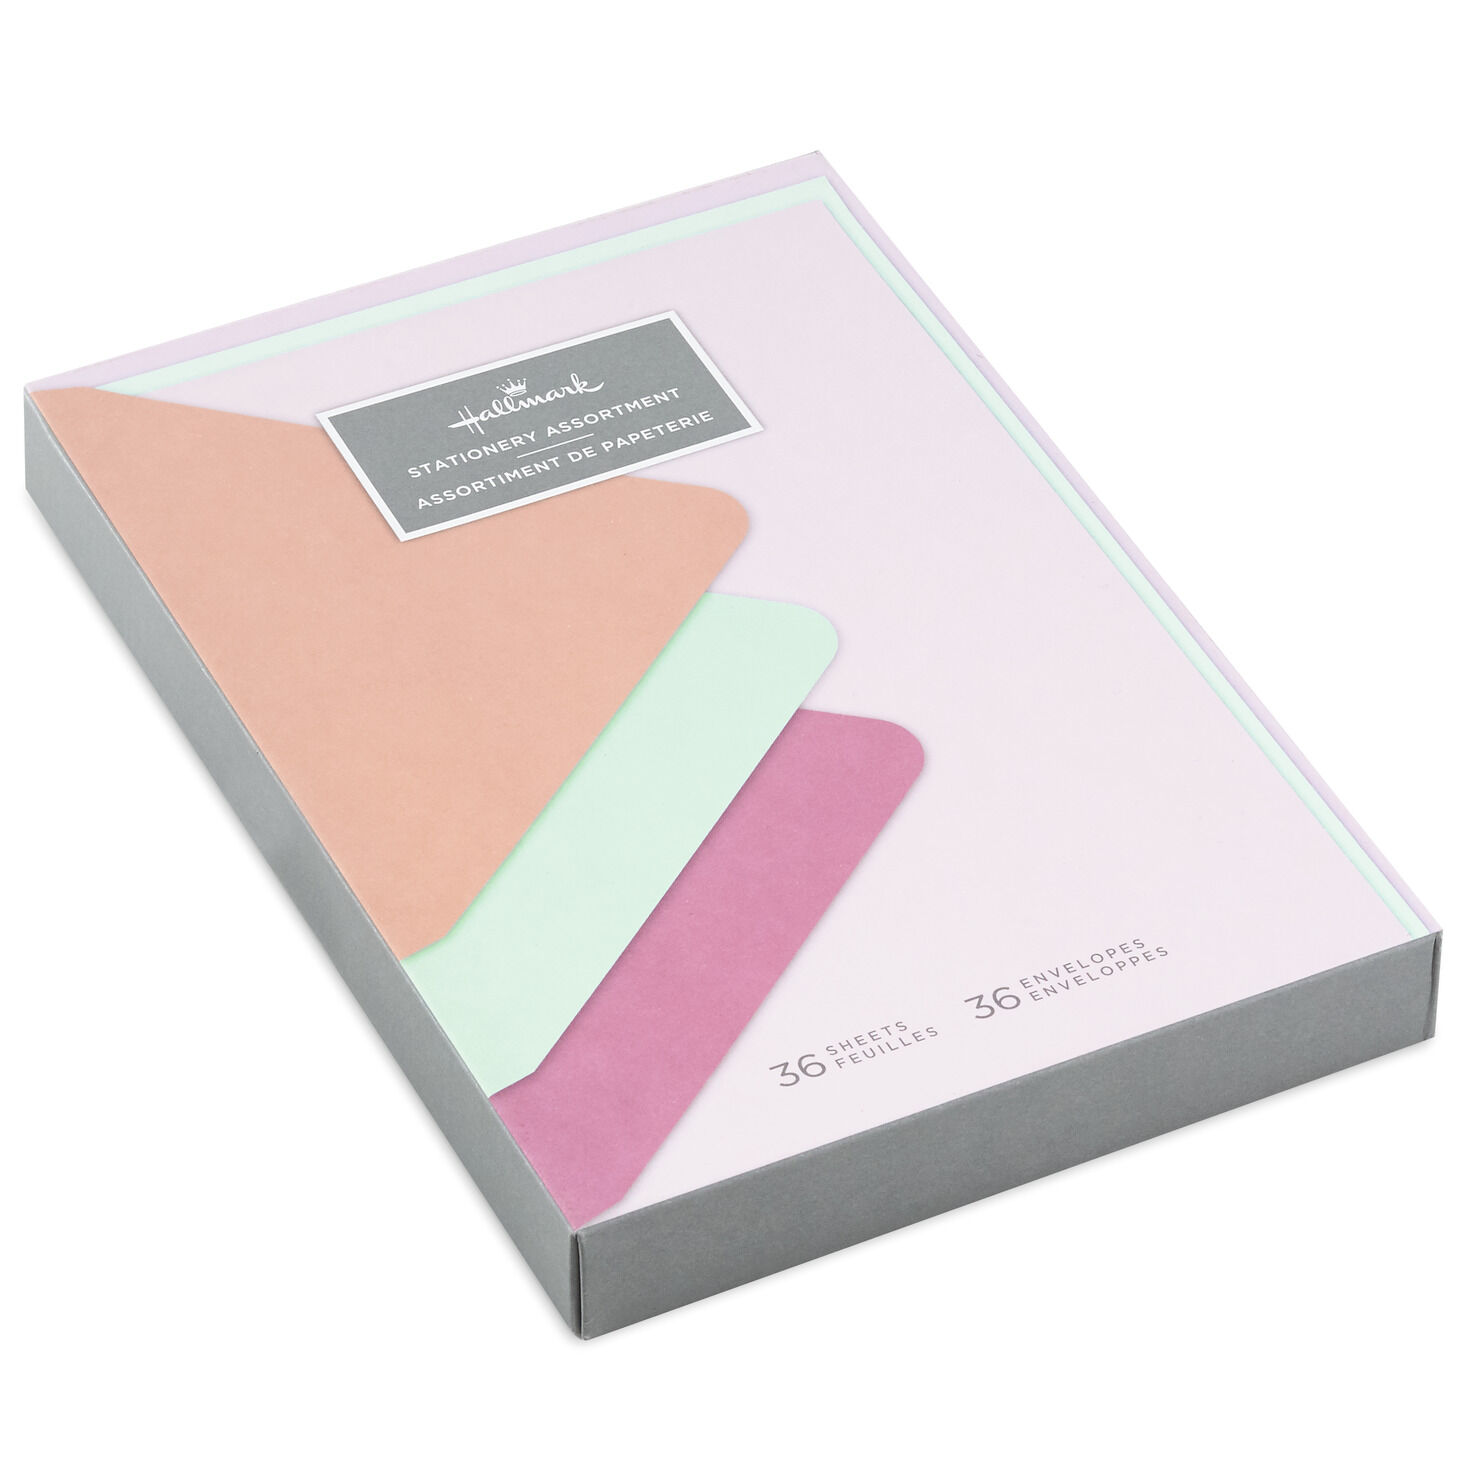 Pastel Paper and Bright Envelopes Stationery Set, 36 sheets for only USD 14.99 | Hallmark